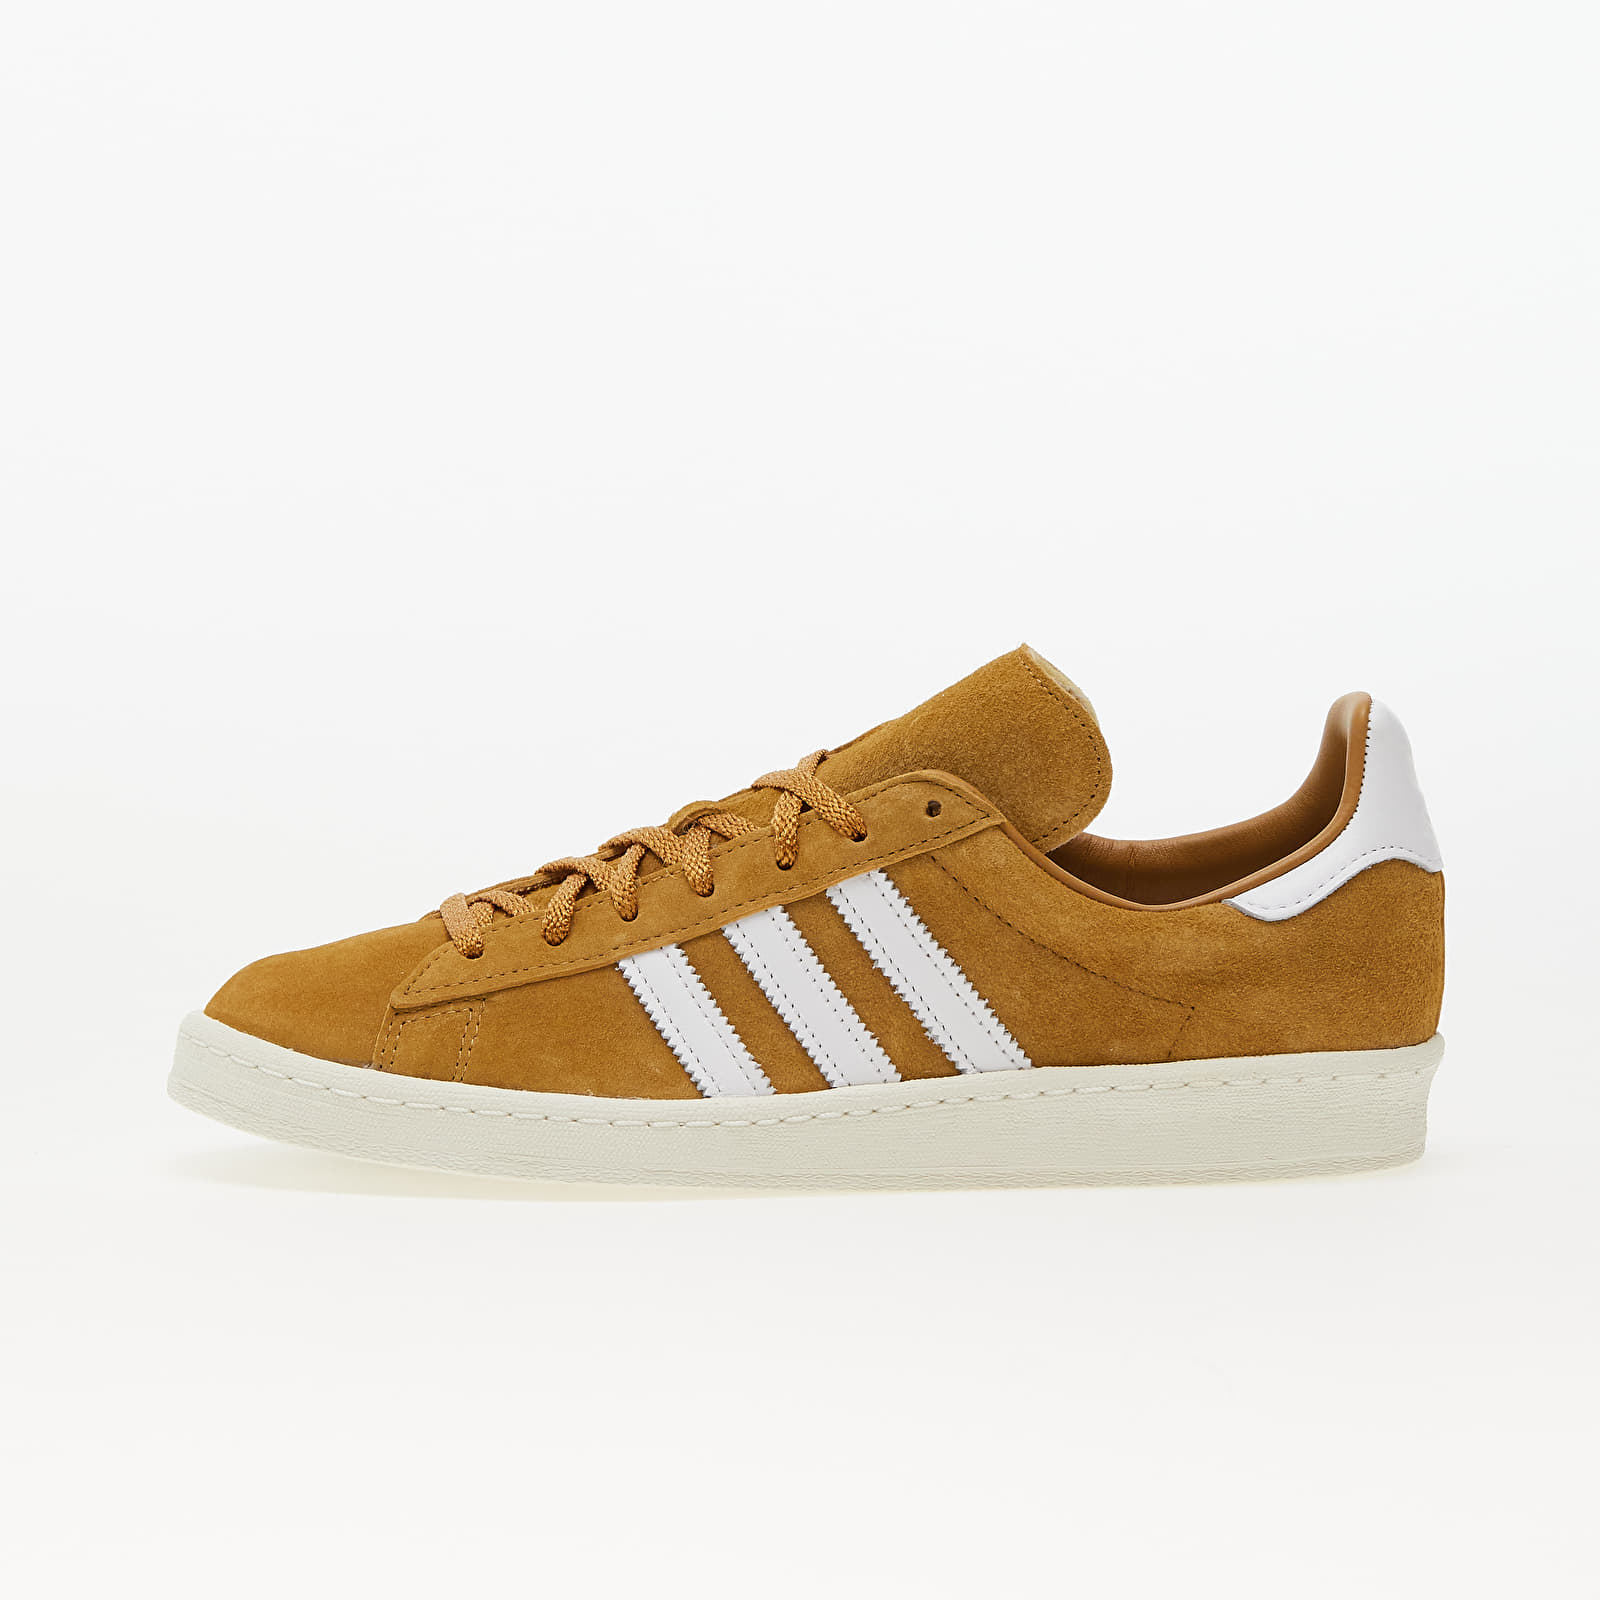 Men's sneakers and shoes adidas Originals Campus 80s Mesa/ Ftw White/ Off White